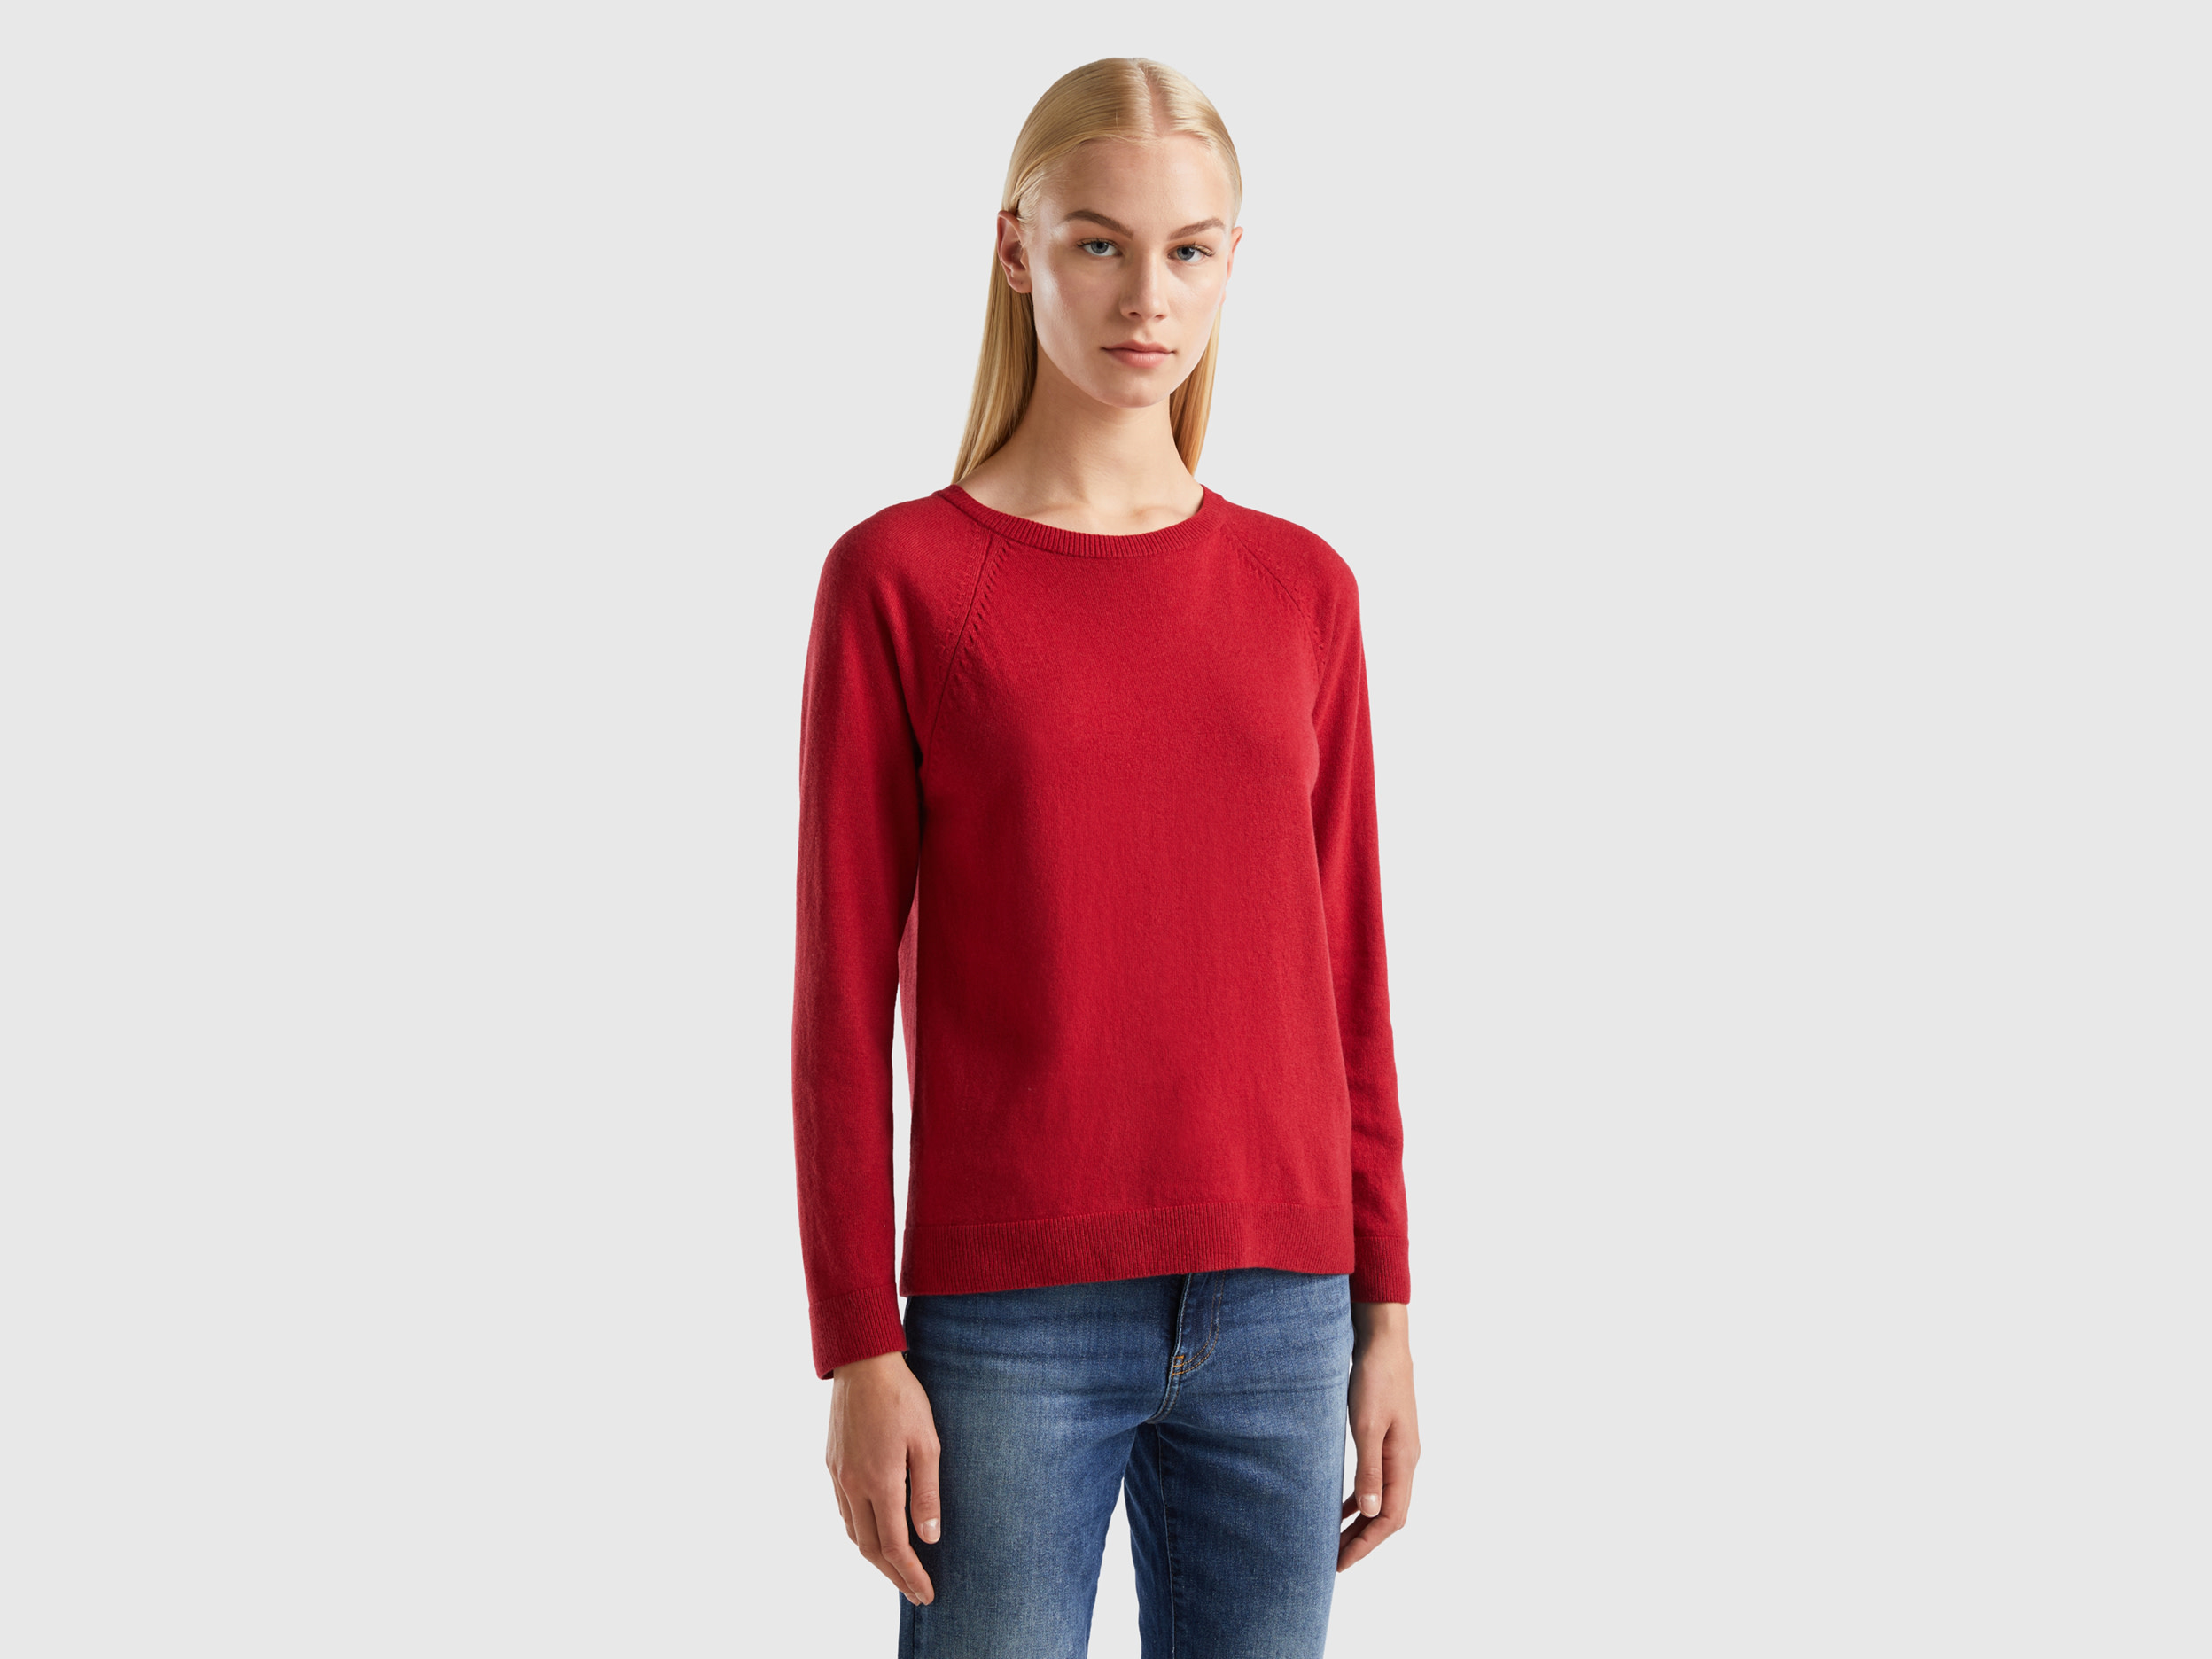 Benetton, Brick Red Crew Neck Sweater In Cashmere And Wool Blend, size XL, Brick Red, Women